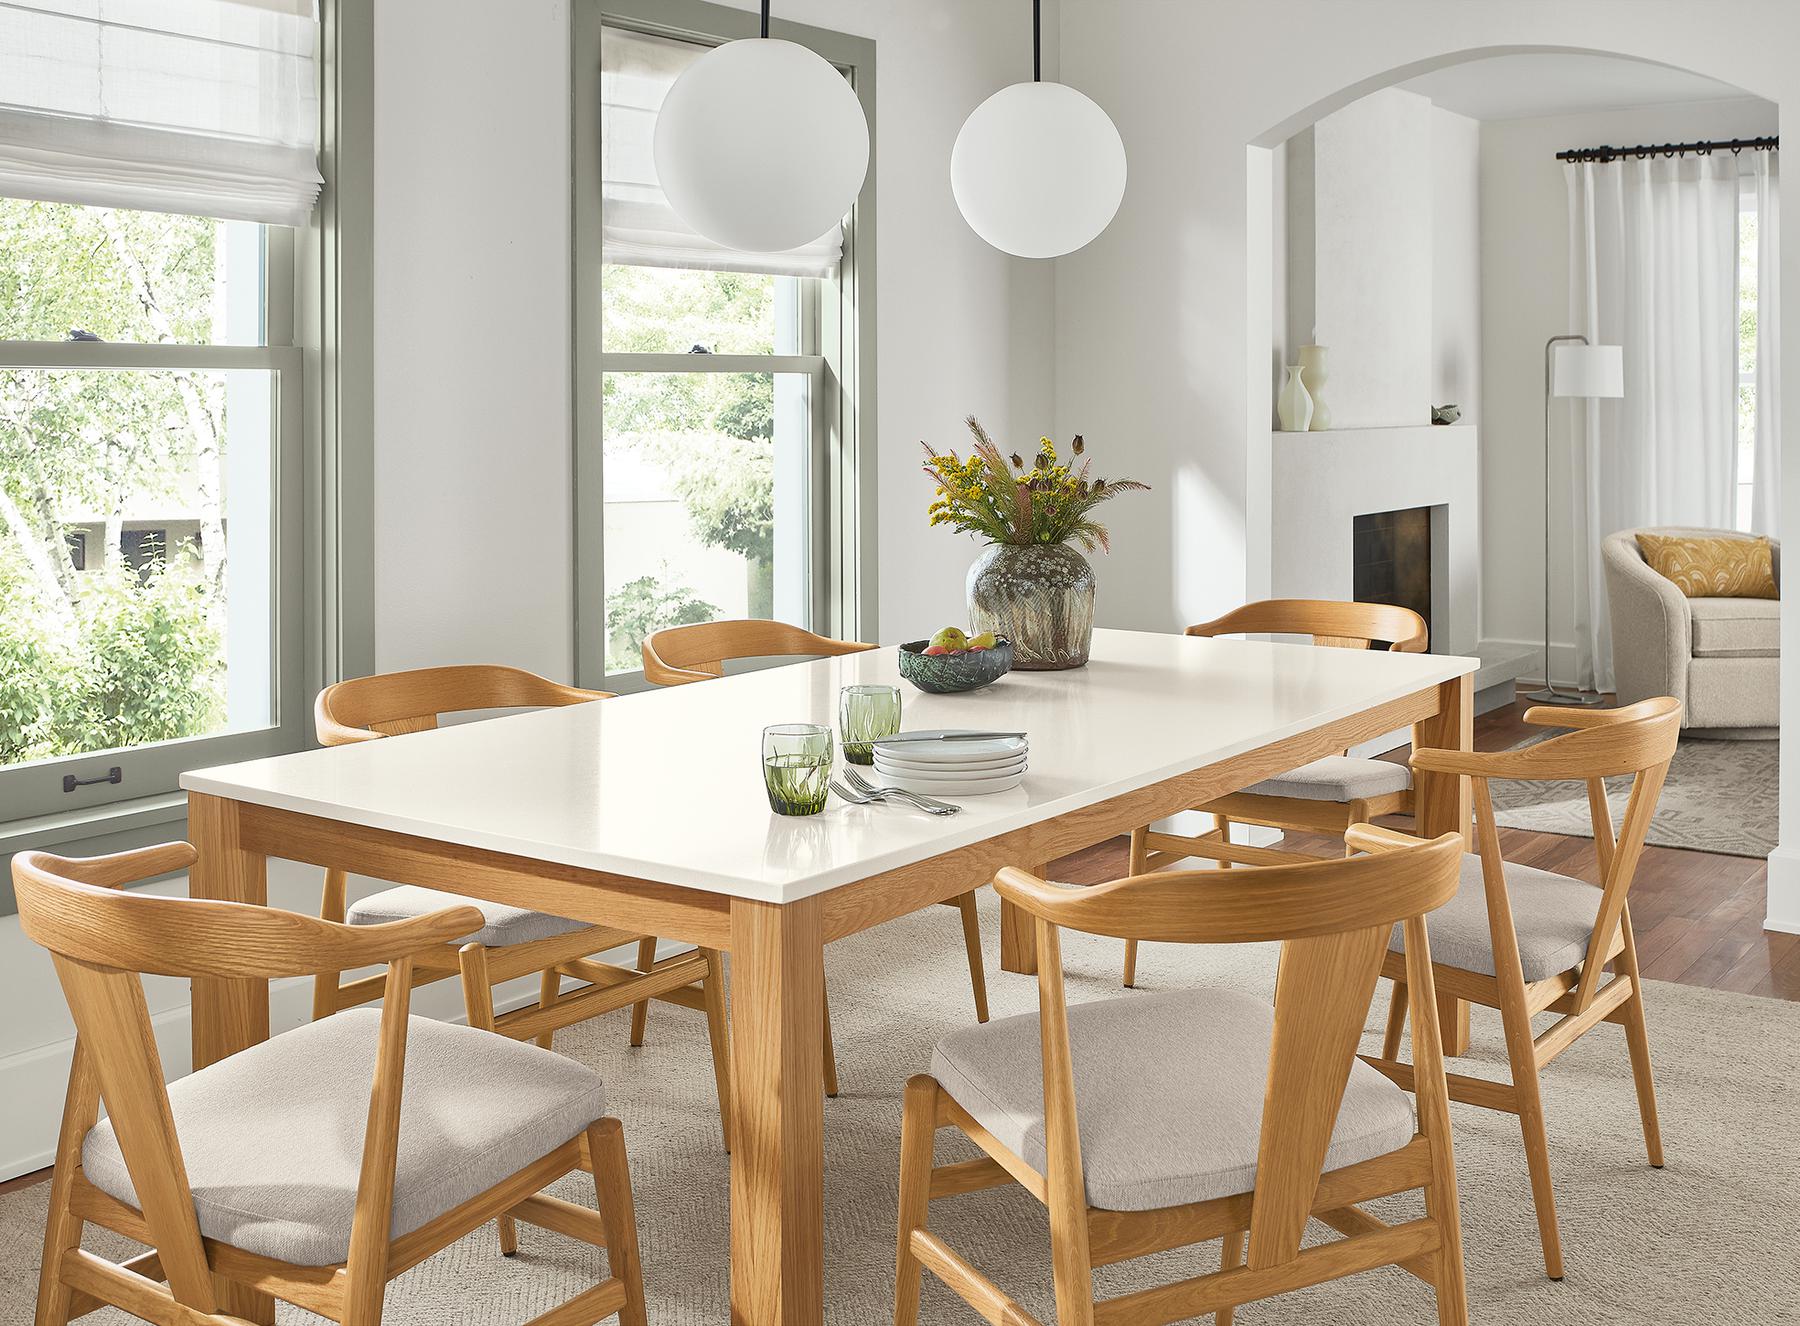 Linden table in white oak with Evan chairs in white oak.